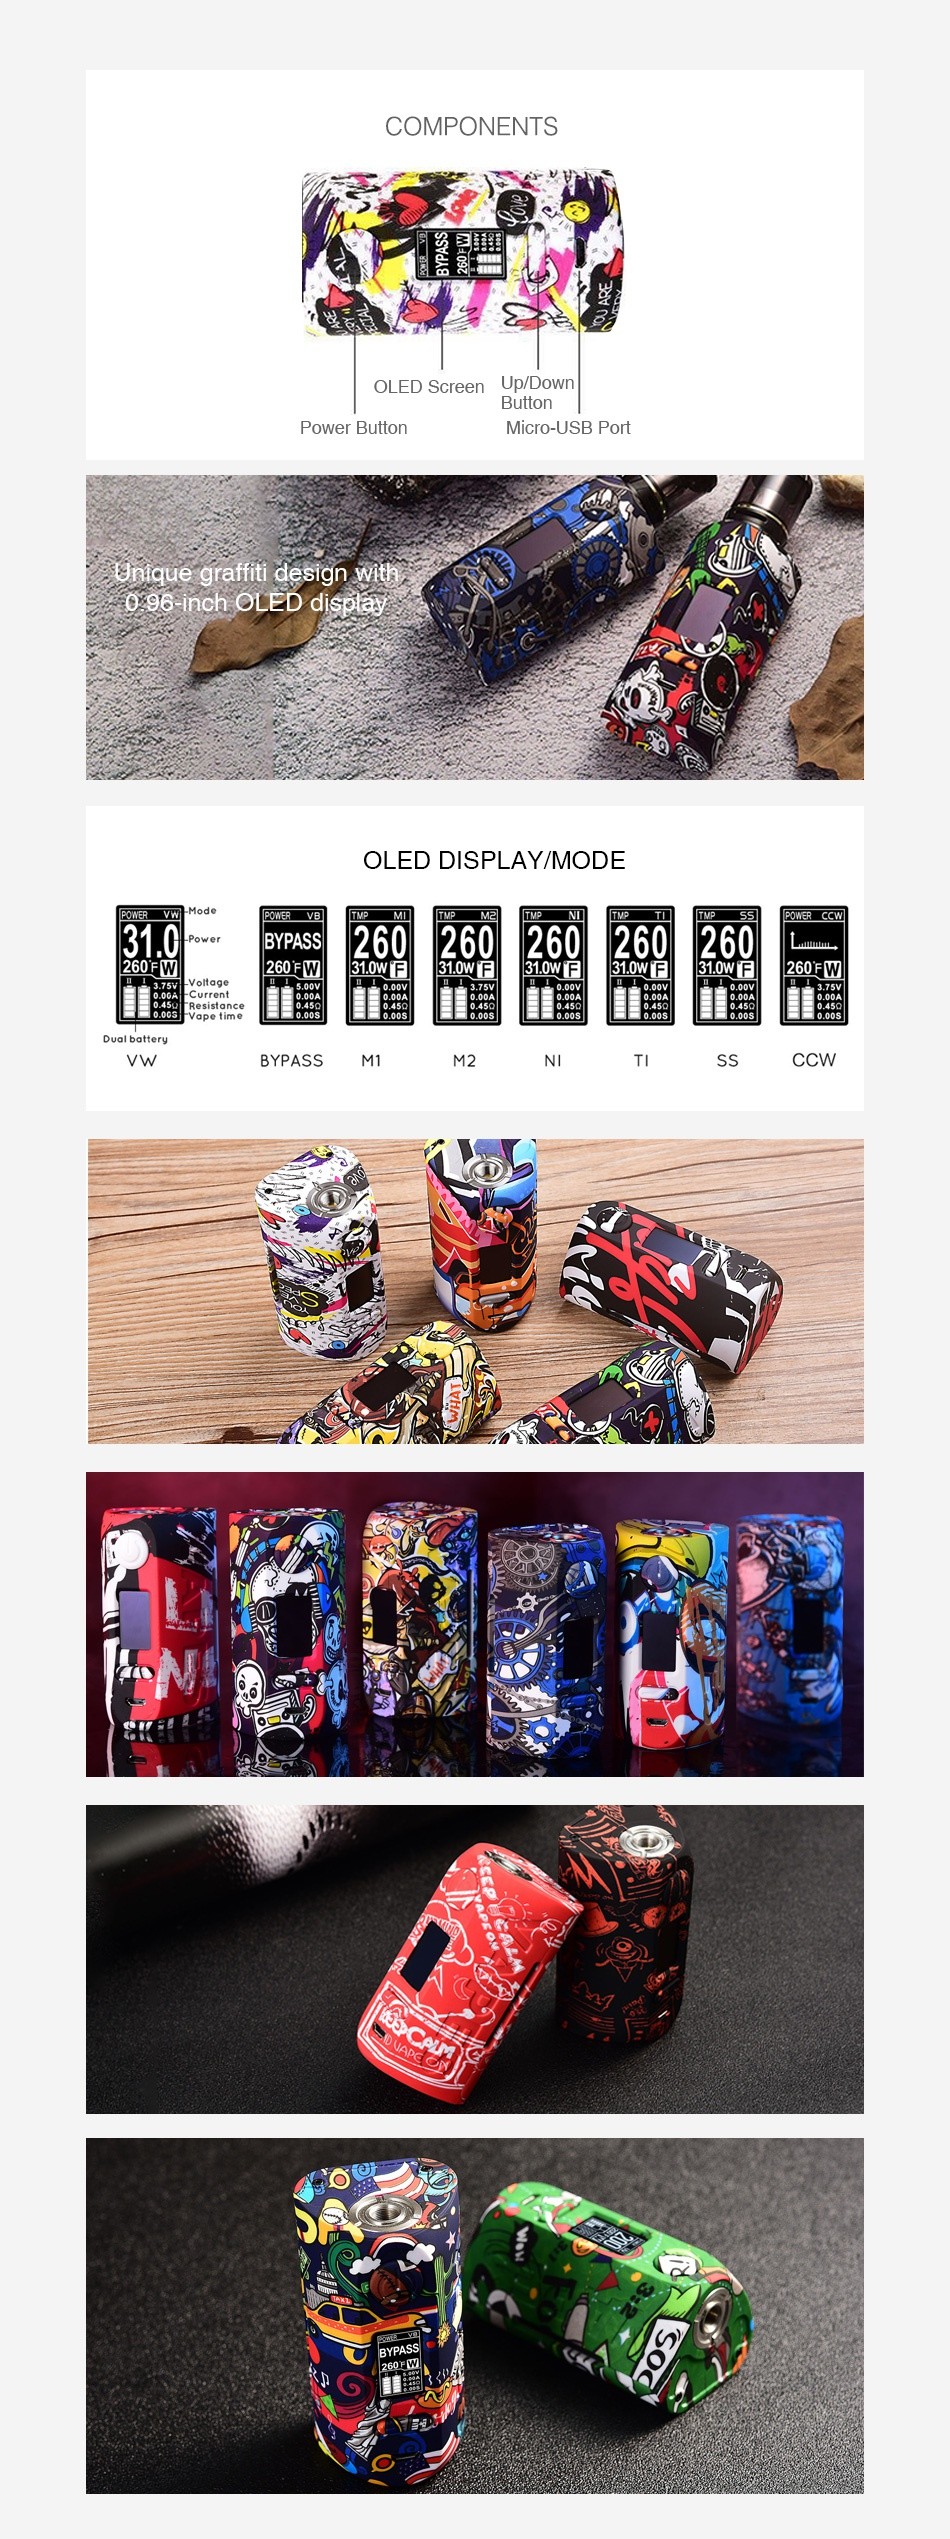 Vapor Storm Puma 200W TC Box MOD COMPONENTS    OLED Scrccn Up Dow Puwer Bullon MiCro USB Porl e 2096 inch OLEd display OLED DISPLAY MODE Cval battery BYPASS MI CCW NH e